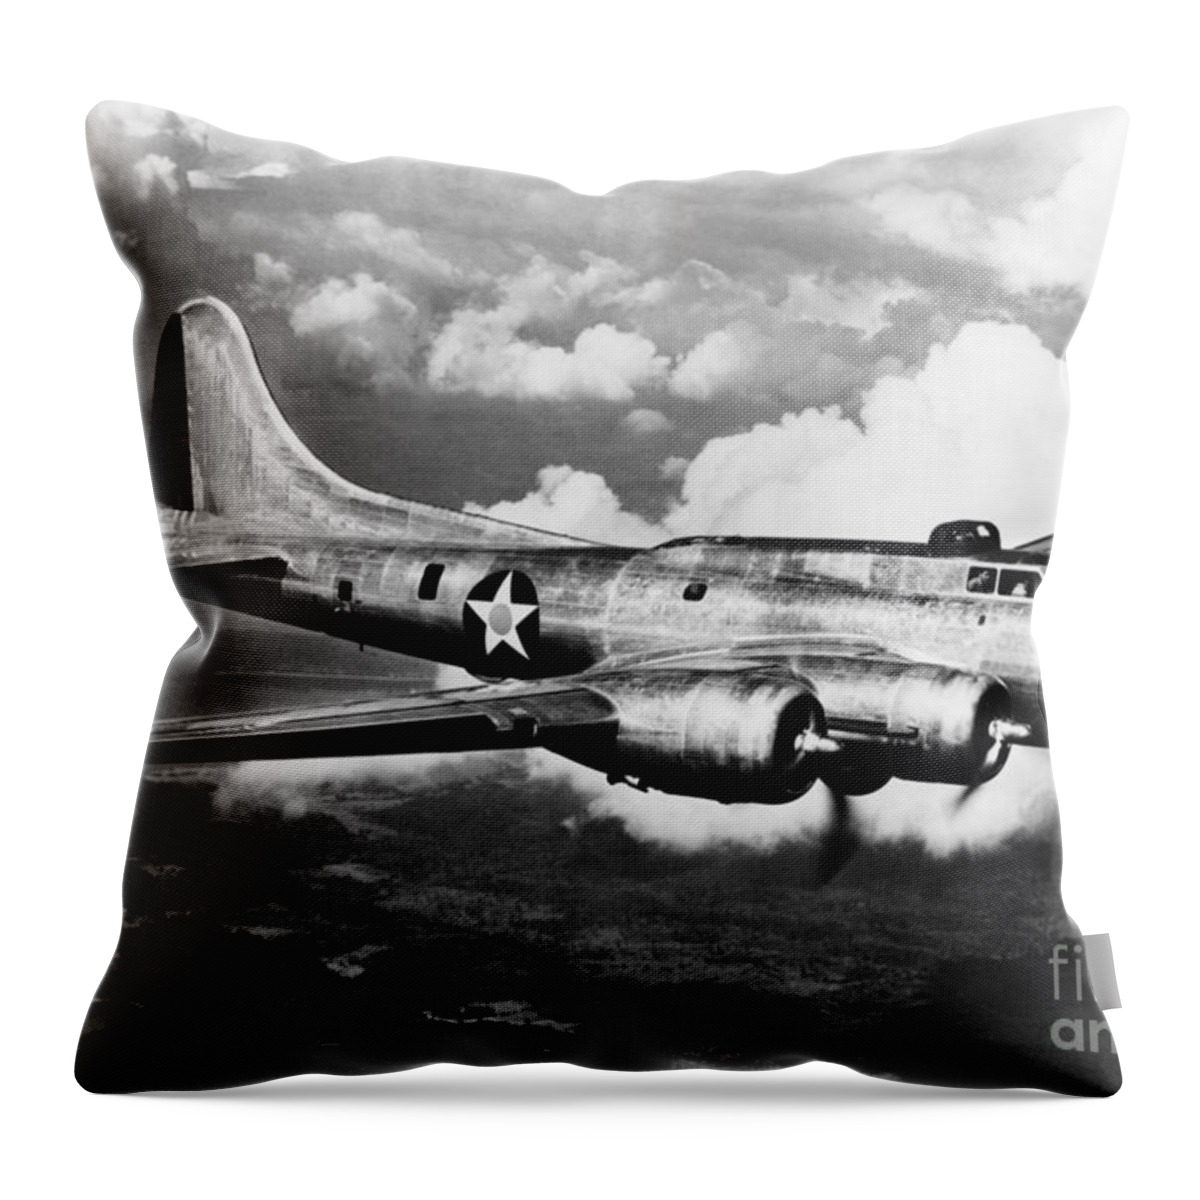 1940s Throw Pillow featuring the photograph Wwii Airplane, Boeing B-17 by H. Armstrong Roberts/ClassicStock